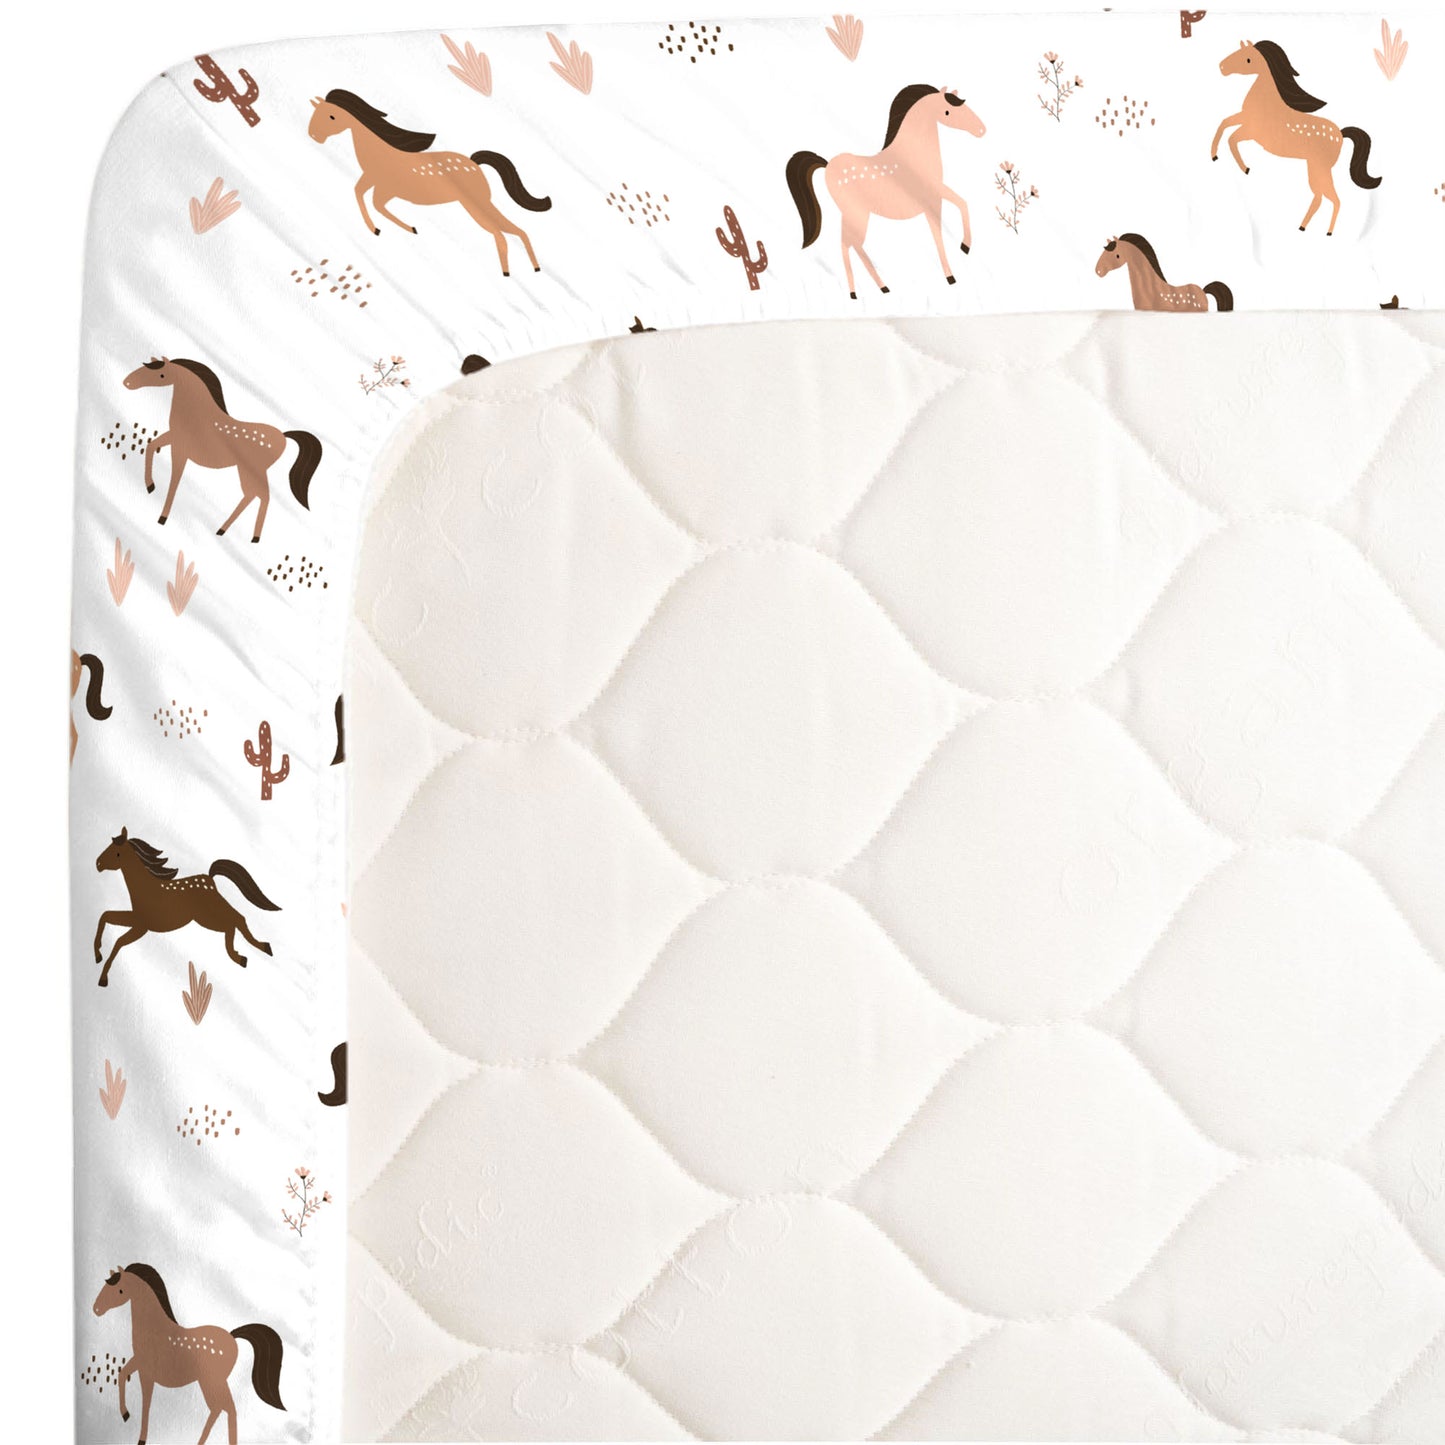 NoJo Desert Sunset Horse Tan, Taupe, Brown and White Super Soft Fitted Crib Sheet